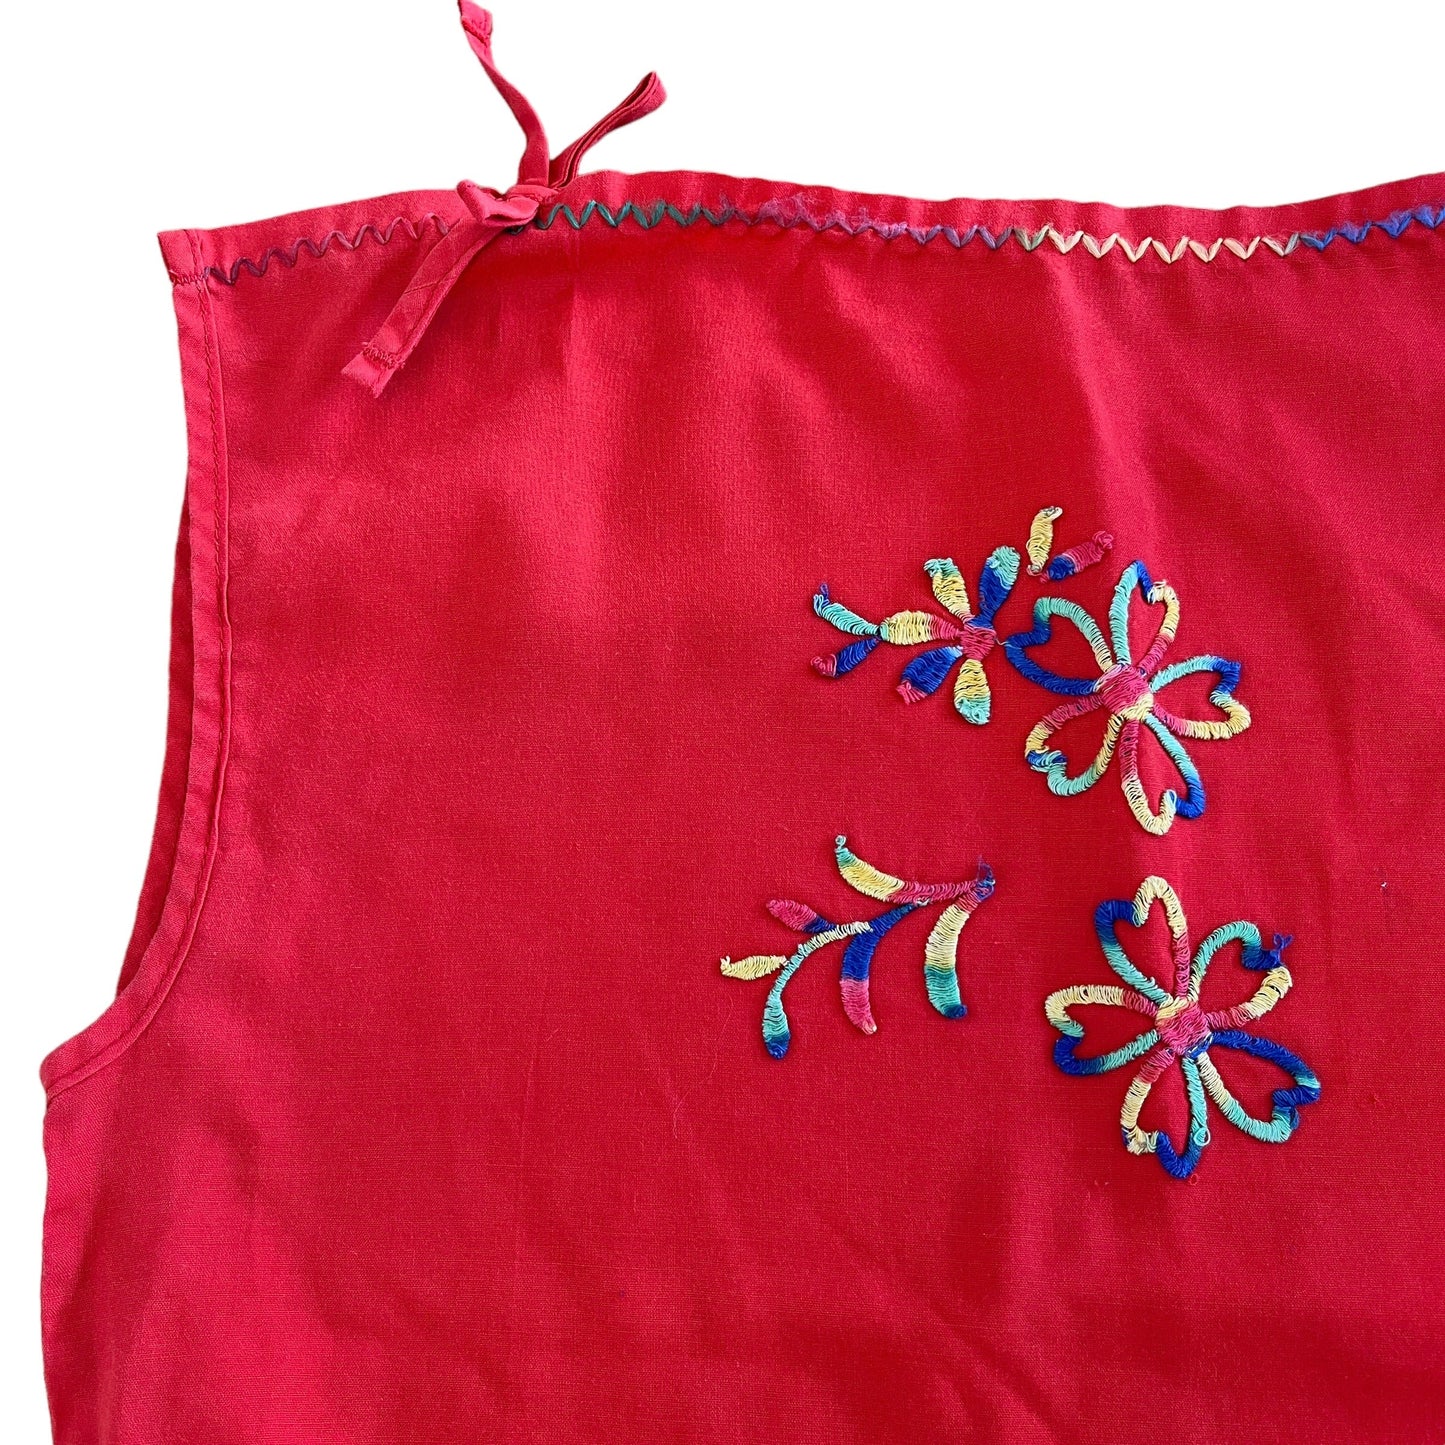 Vintage 1970s Red Boho Folk Embroidered Top 10-12 Years